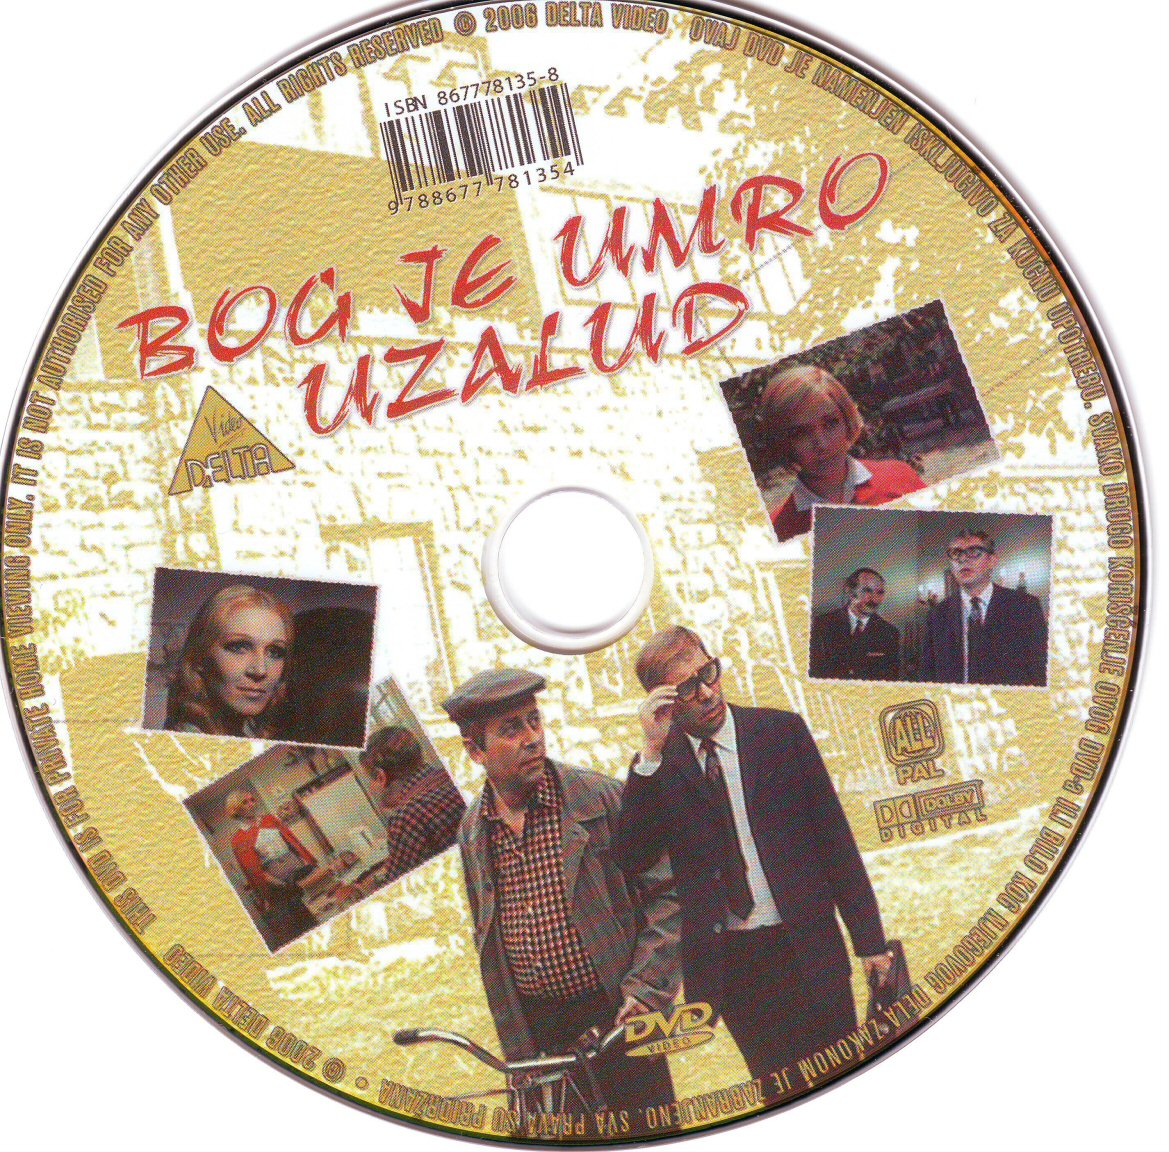 Click to view full size image -  DVD Cover - B - DVD - BOG JE UMRO UZALUD - CD - DVD - BOG JE UMRO UZALUD - CD.jpg